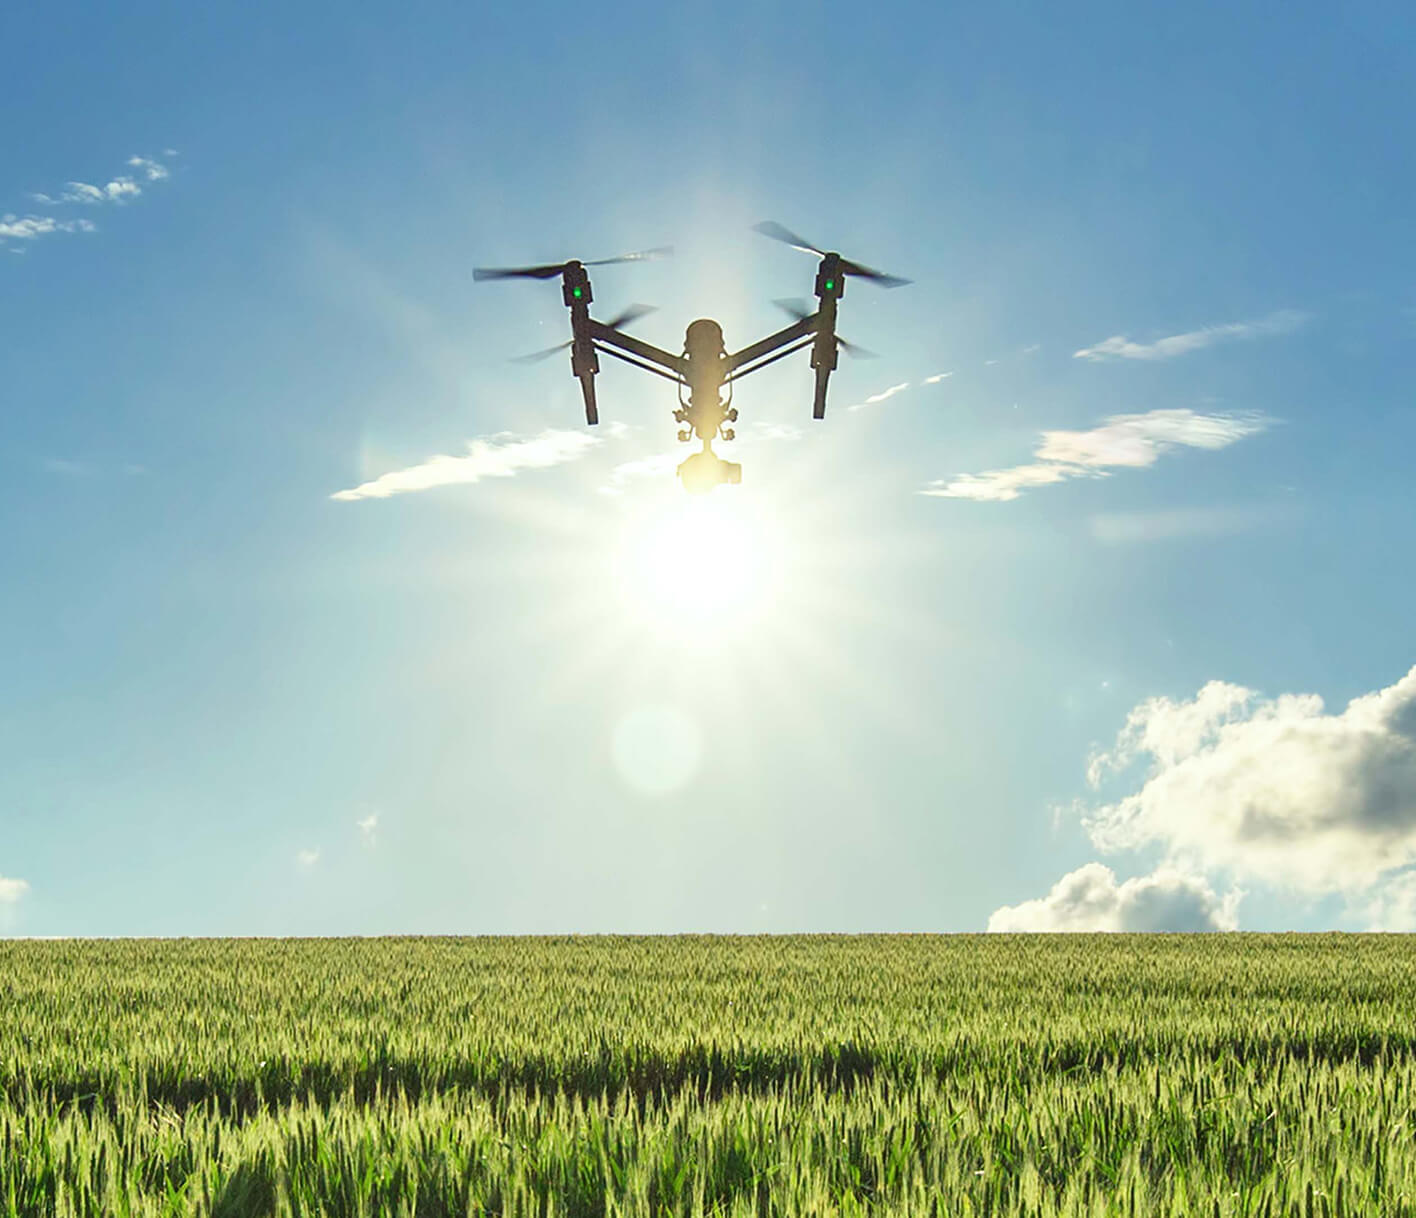 Drone flying over a field in the sun.